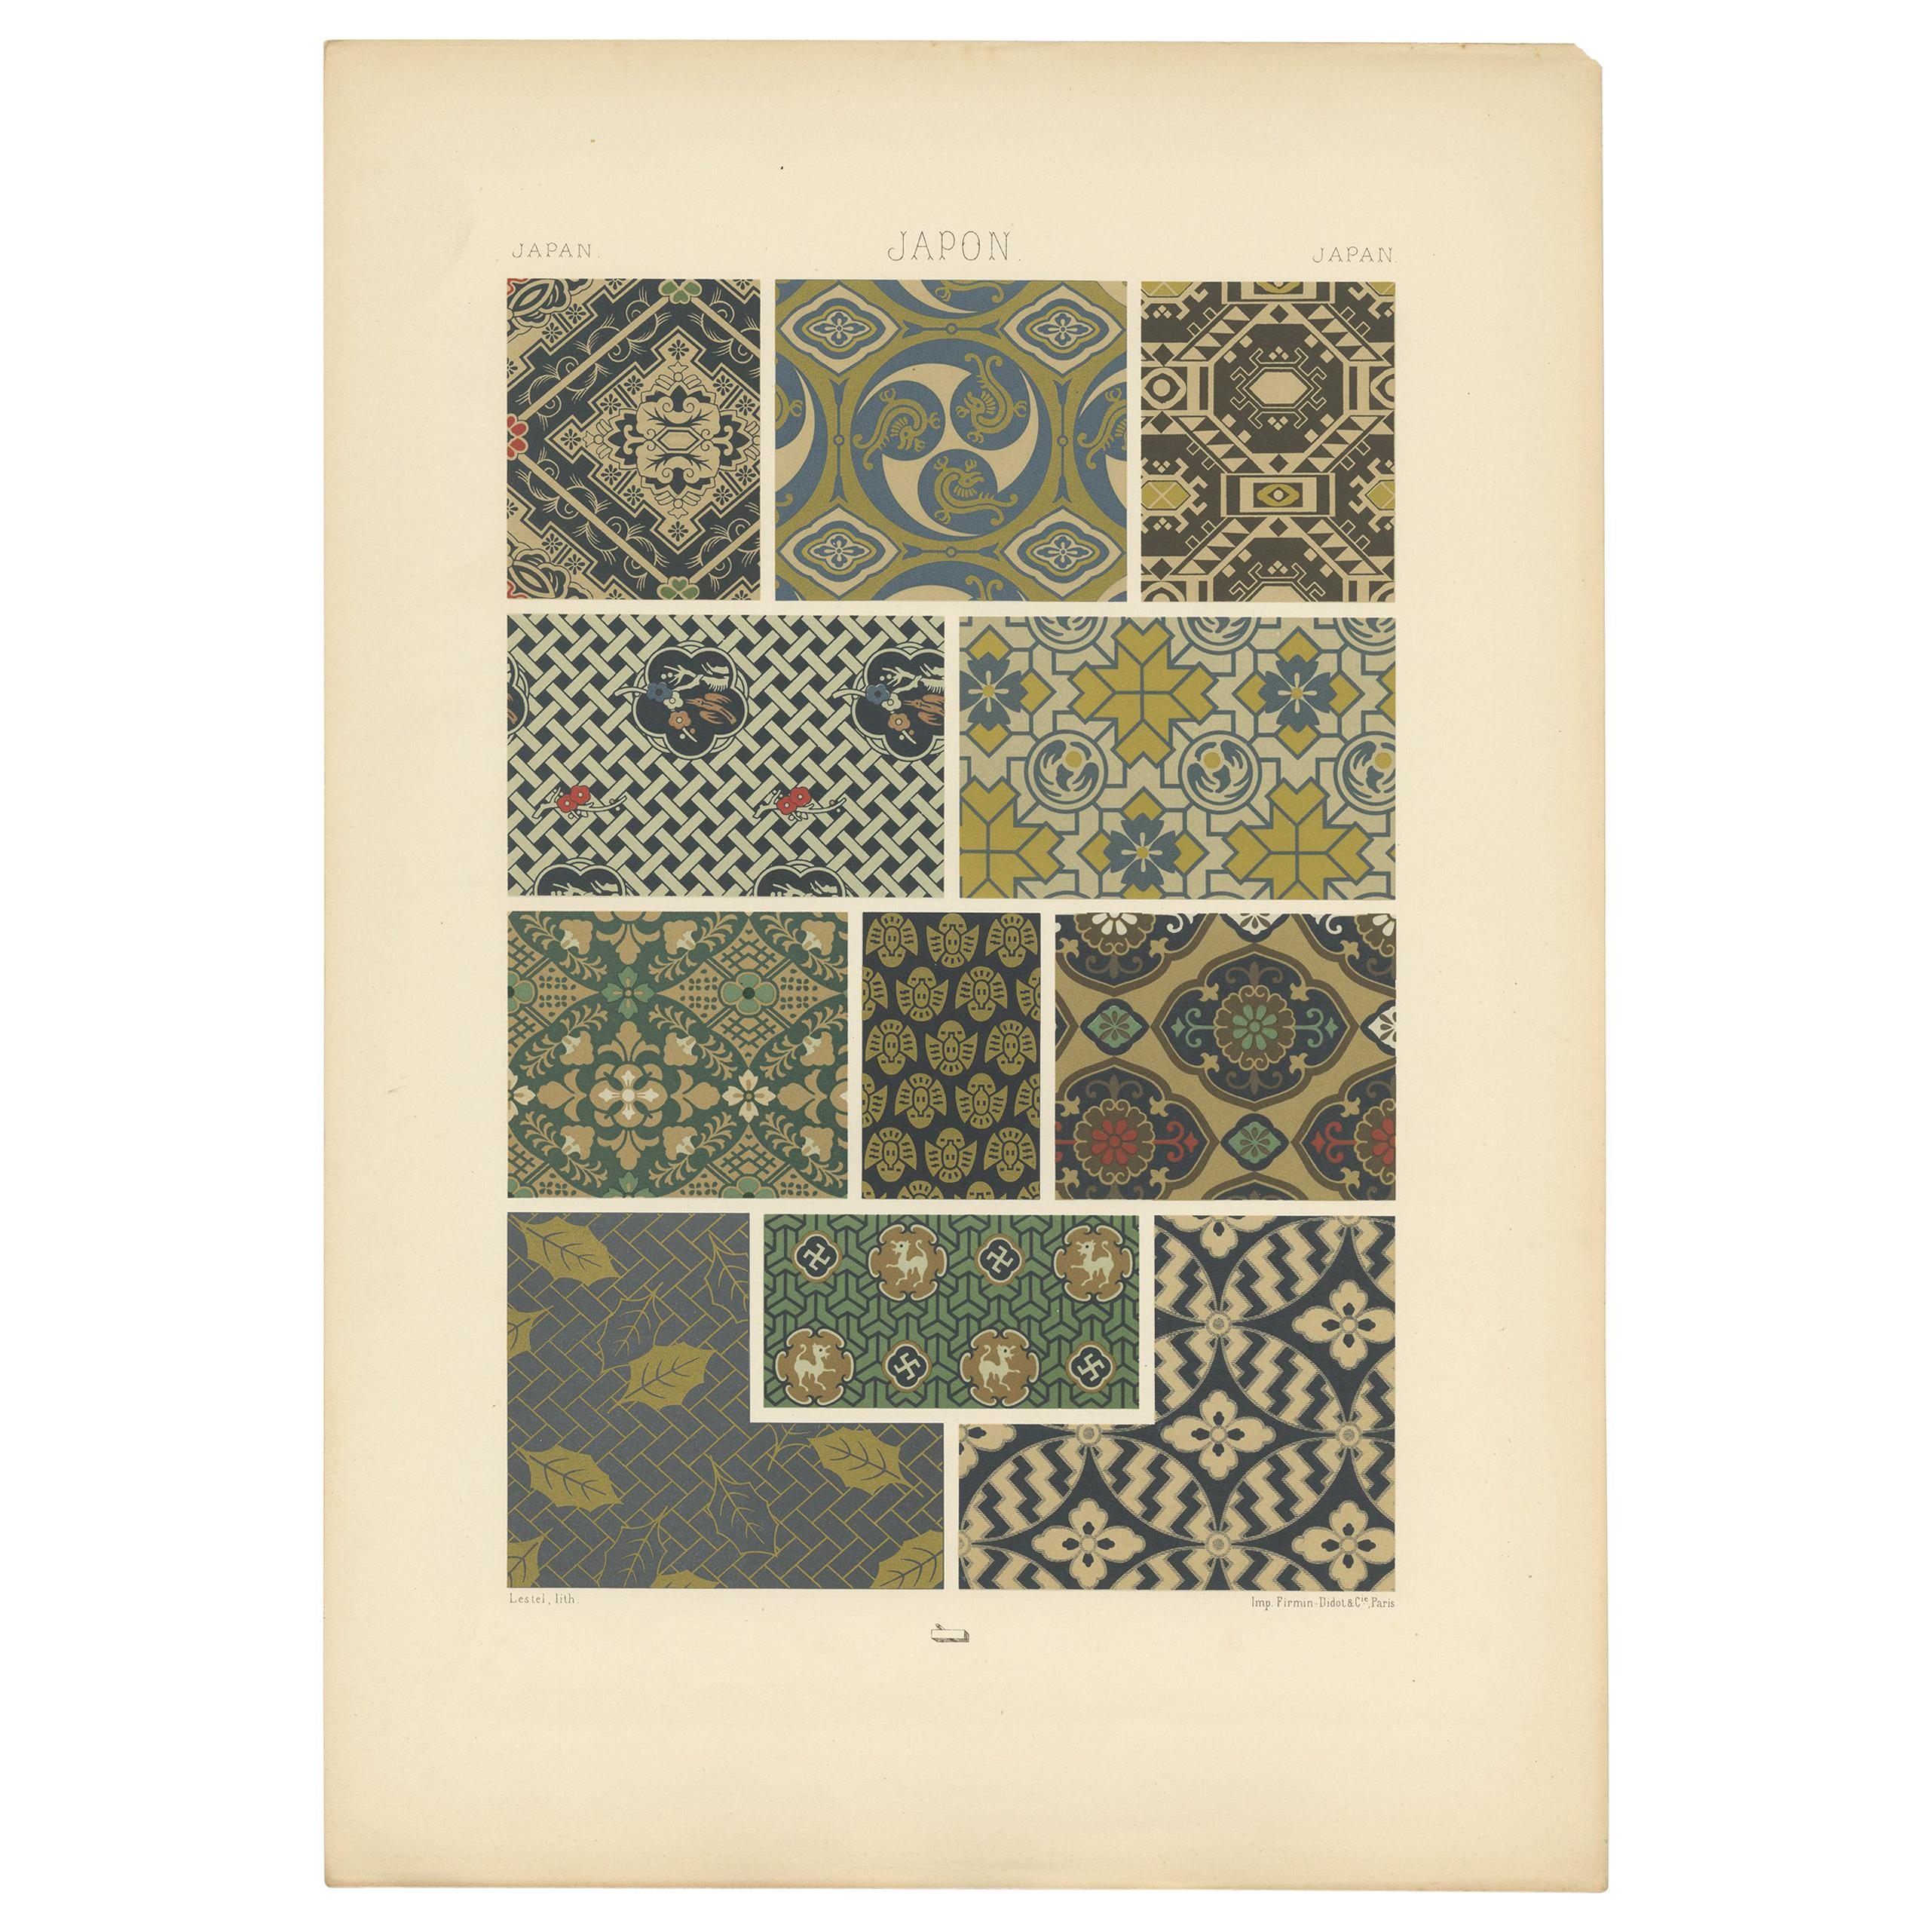 Pl. 12 Antique Print of Japanese Motifs and Textiles Ornaments by Racinet